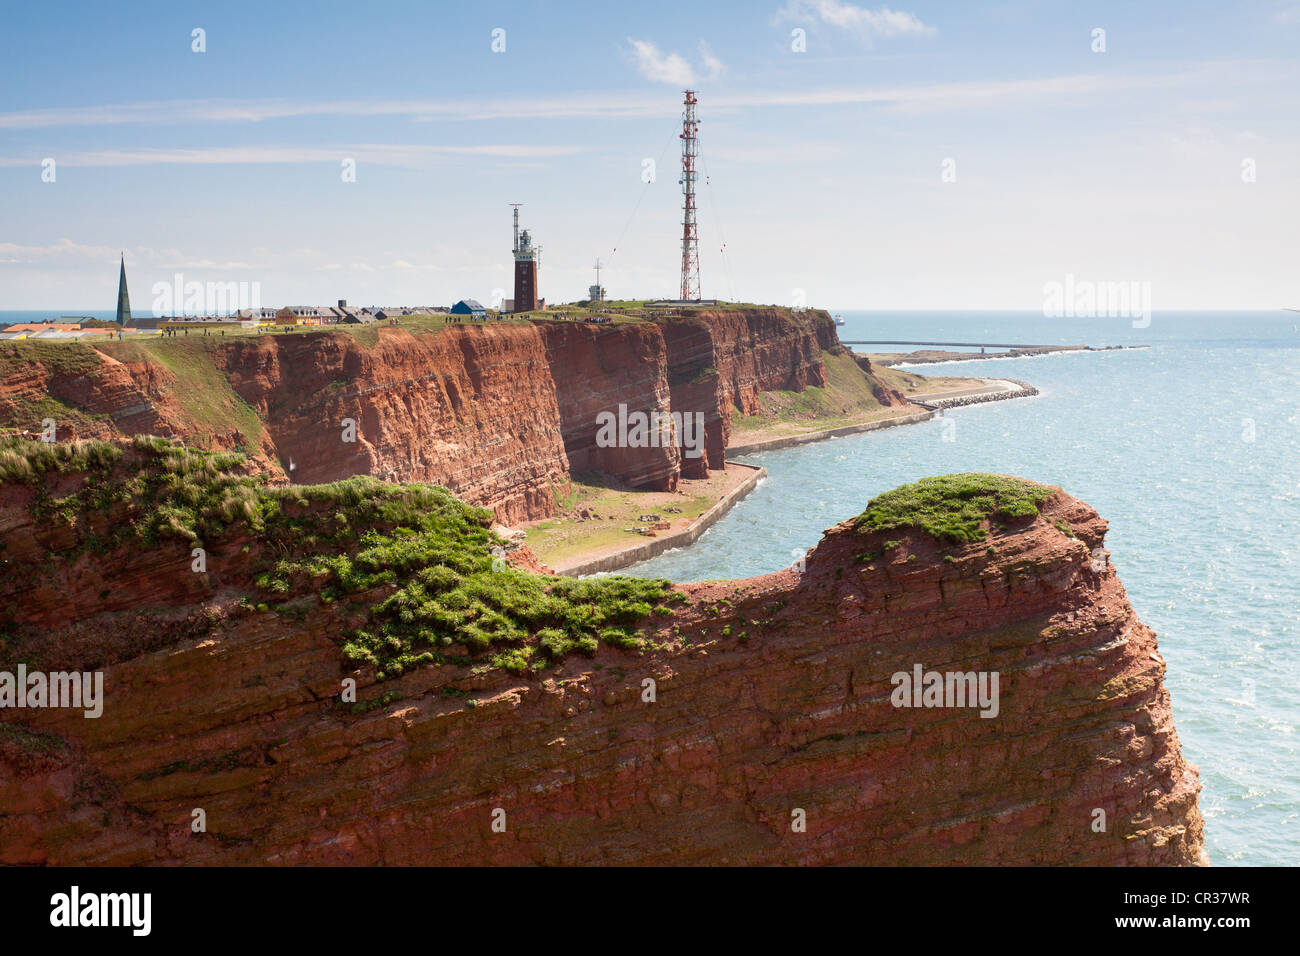 The prominent steep red sandstone cliffs of Heligoland with its lighthouse and a radio tower, Helgoland, Schleswig-Holstein Stock Photo